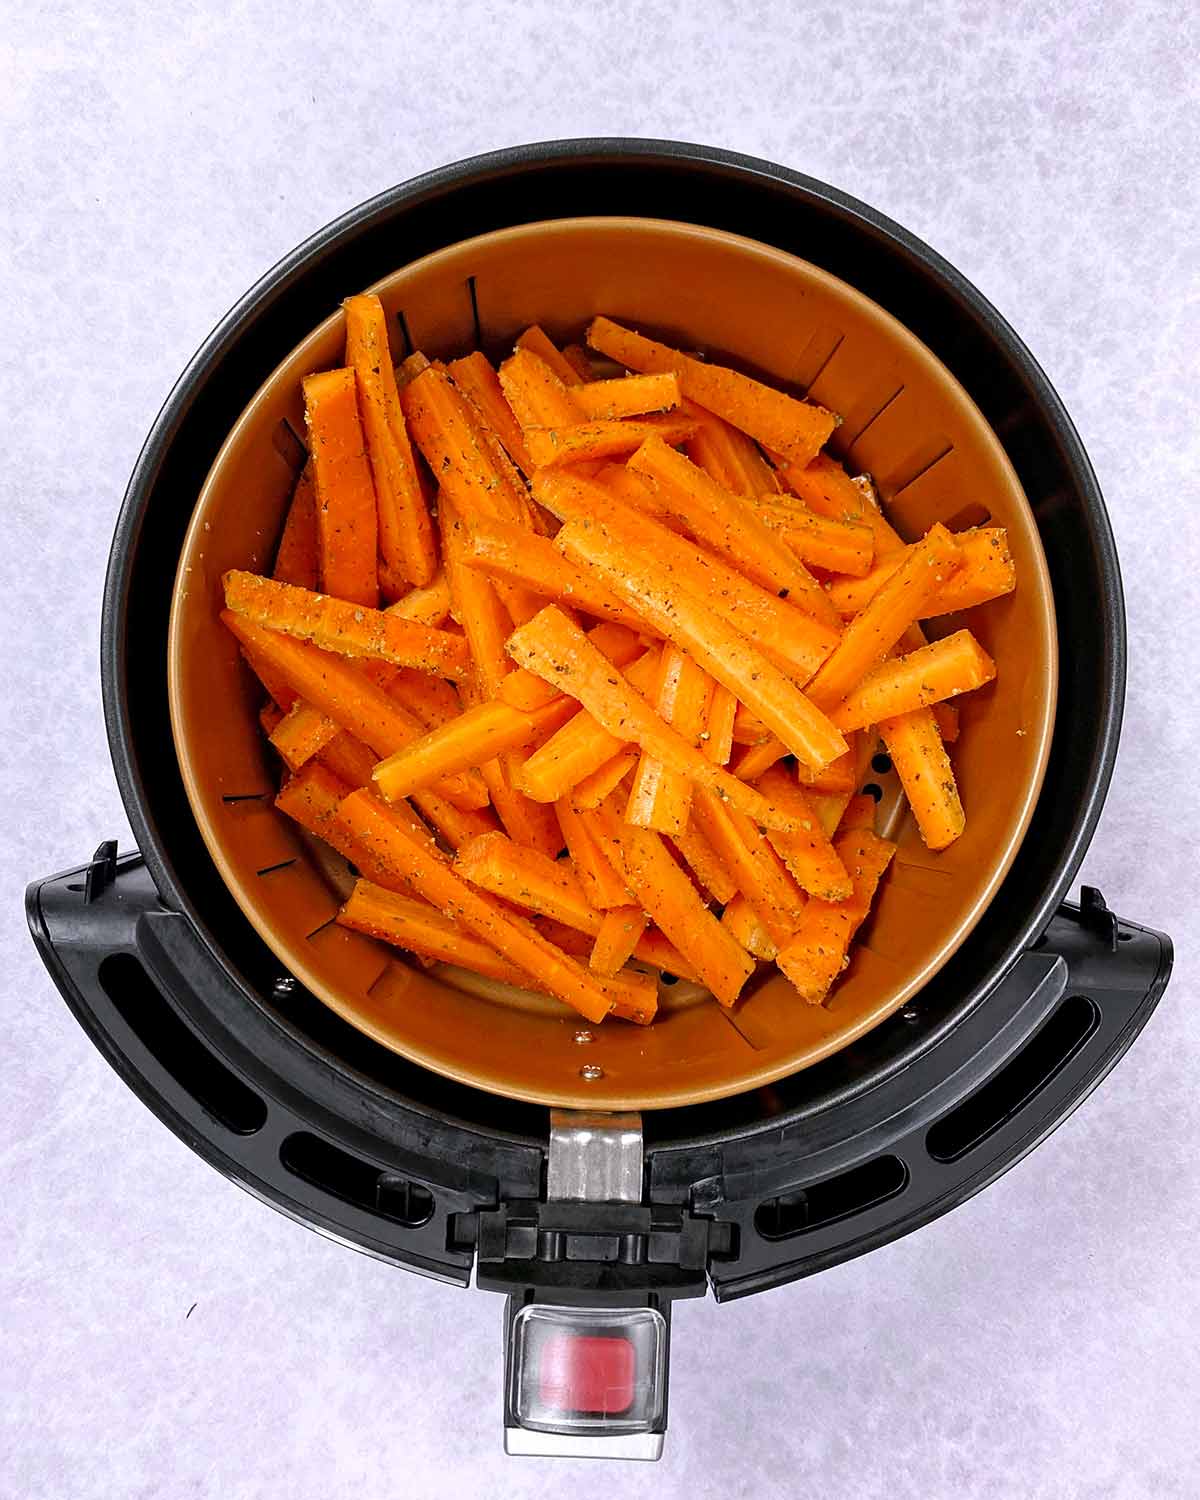 An air fryer basket containing uncooked carrot battens.